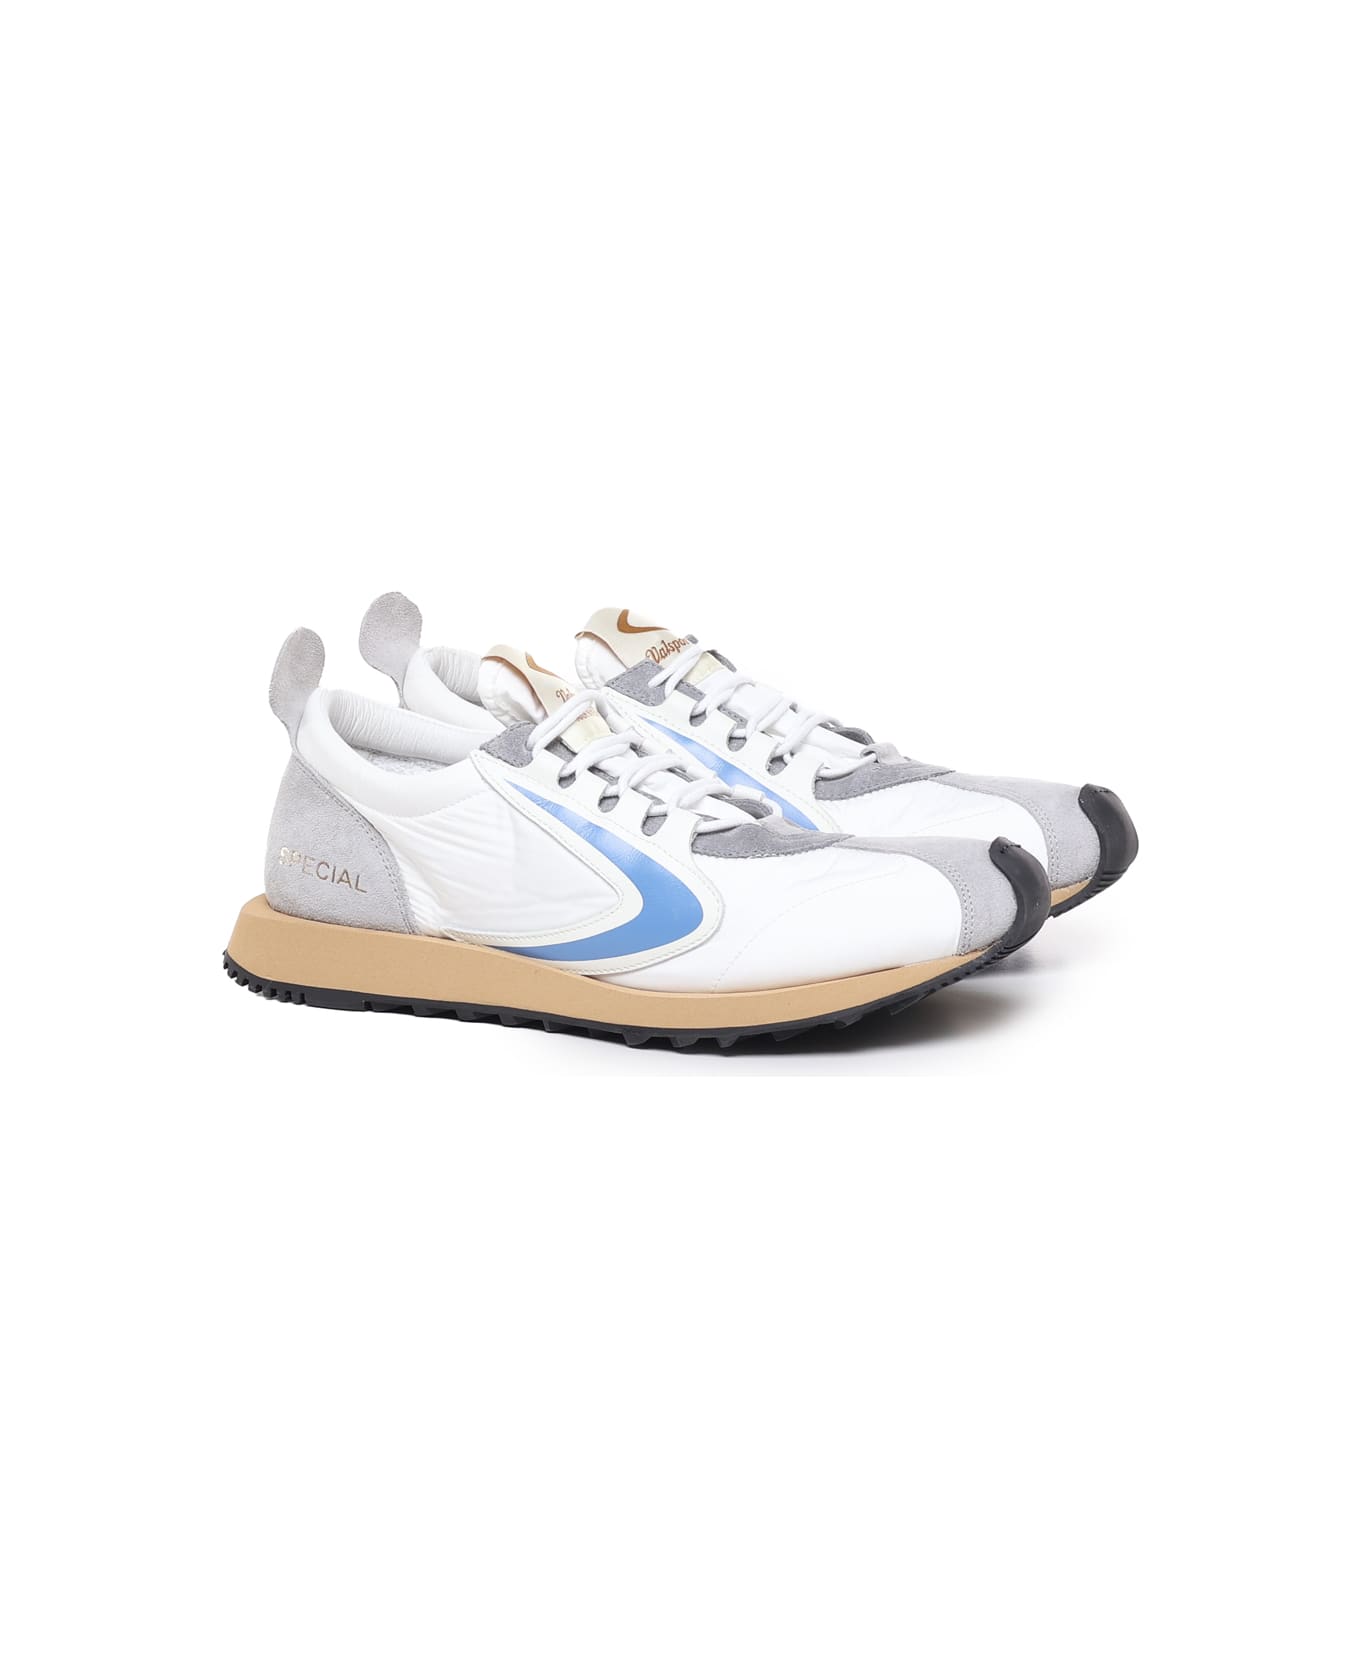 Valsport Special 16 Sneakers - White, grey, light blue